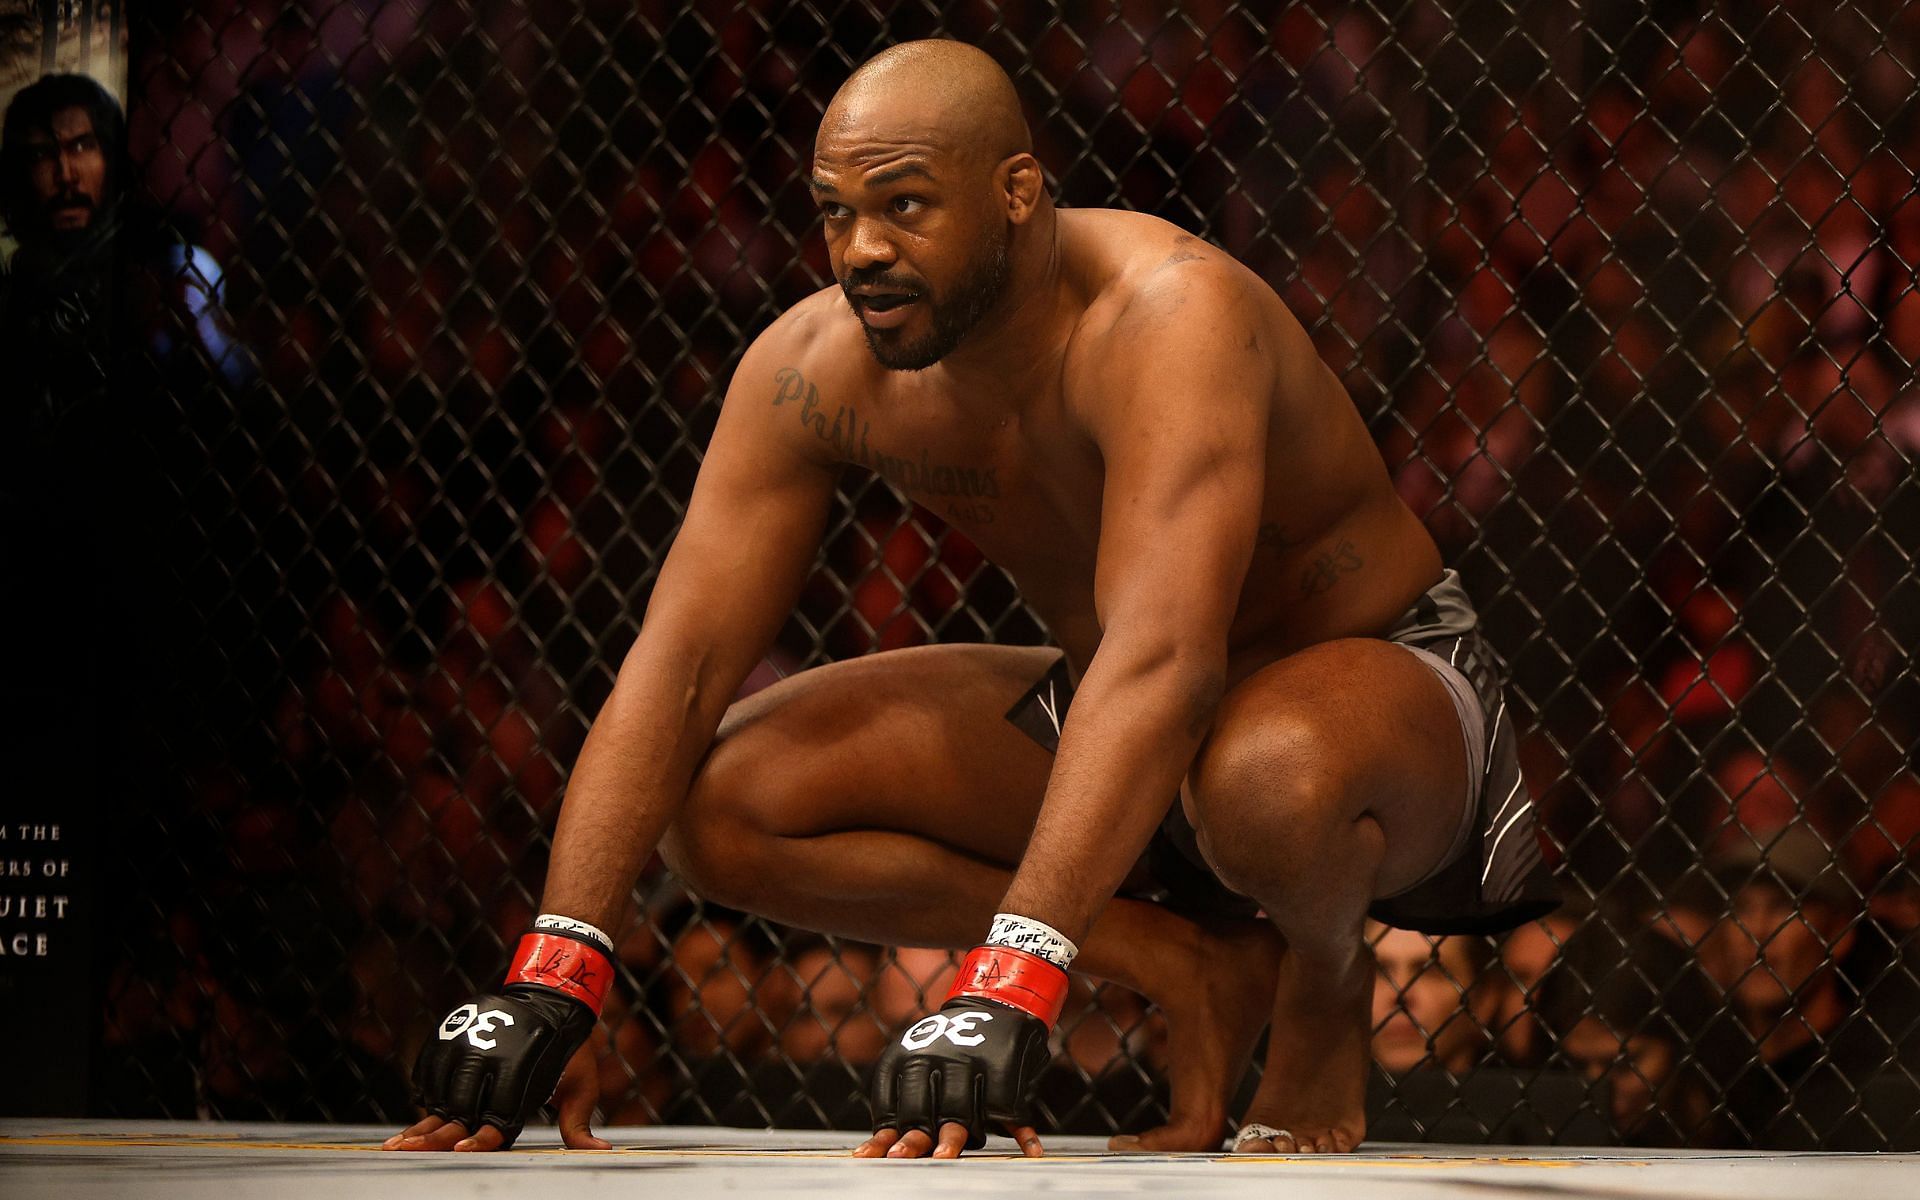 Former UFC light heavyweight champion and current UFC heavyweight champion Jon Jones is heralded as one of the greatest MMA fighters ever [Images courtesy: Getty Images]